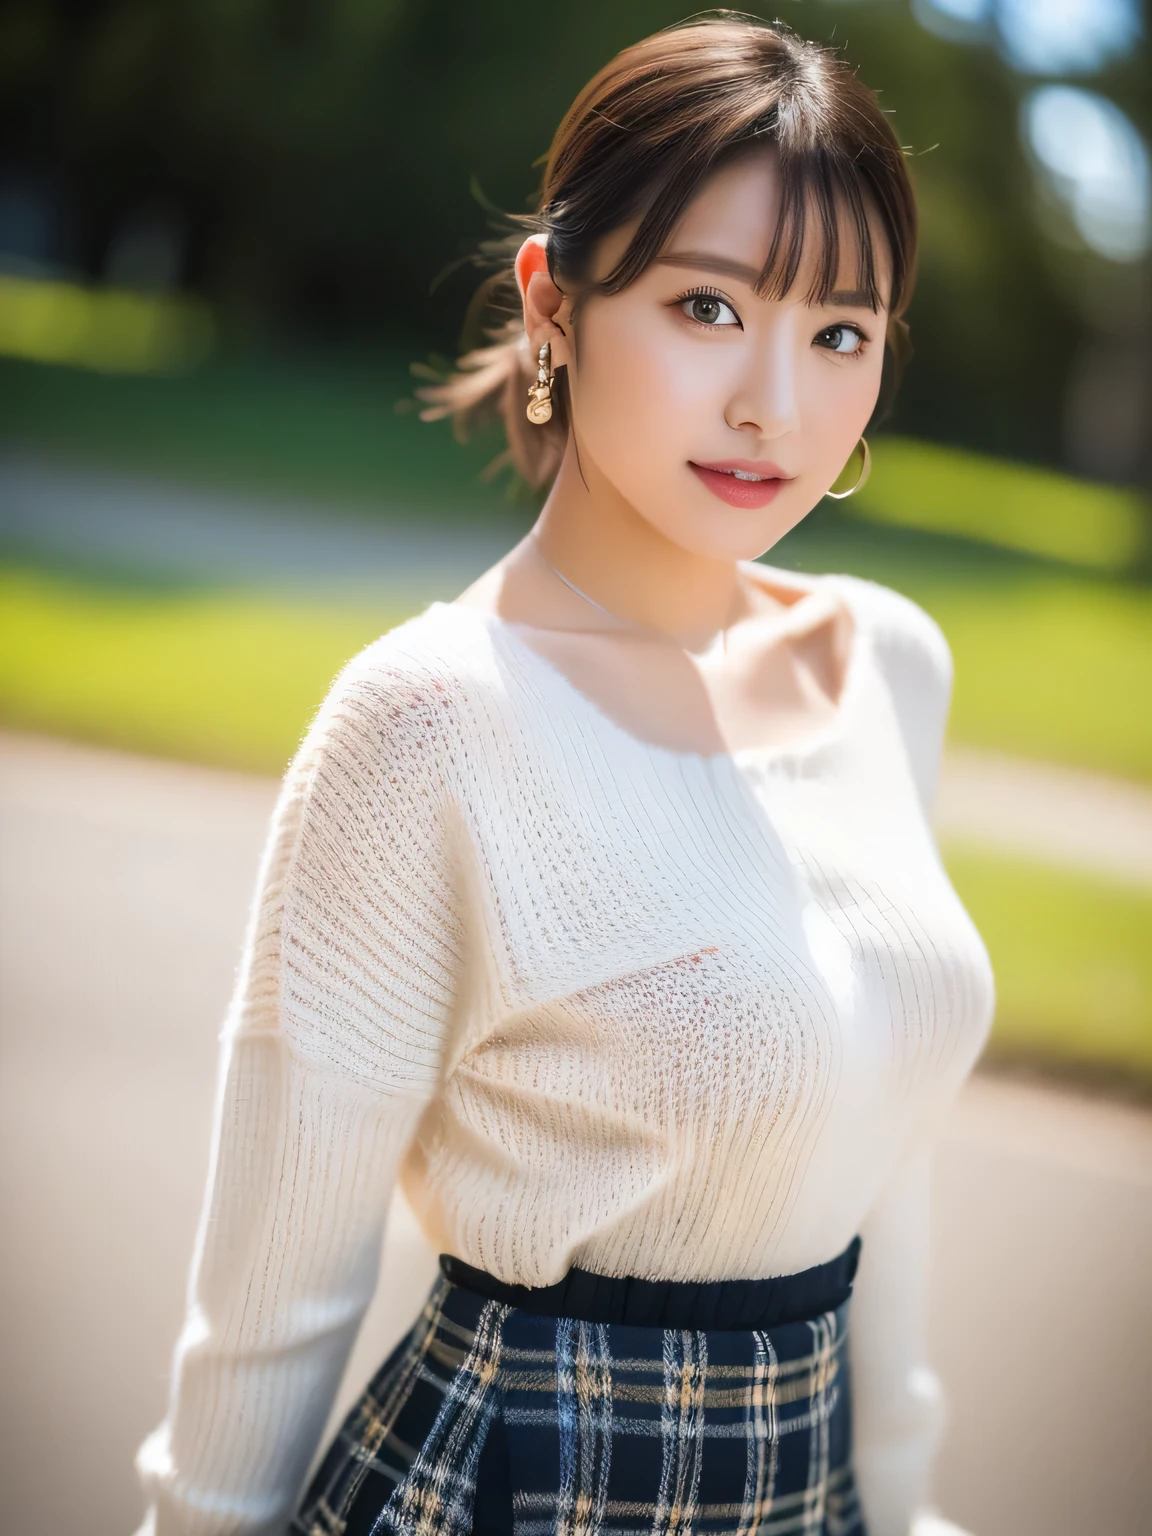 ((highest quality, 8K, masterpiece :1.3)), (realistic, Photoreal:1.4), sharp focus：1.2, 
Bright colors, professional level, shallow depth of field, 
20-year-old, 1 person, A beautiful face with intelligence, 
Supple body :1.3, model body shape:1.5, 頭w:1.4, perfect style：1.4, 
narrow shoulders, beautiful clavicle, long and thin legs, The beauty of slim abs :1.2, thin waist :1.2, 
super detailed skin, Fair skin, Shiny skin, 
super detailed face, slim facial contour, beautiful small face, Beautiful lined nose, 
super detailed eyes, long slit eyes, brown eyes, double eyelid, beautiful thin eyebrows, fine long eyelashes, 
super detailed lips, plump lips, glossy pink lips, flushed cheeks, beautiful teeth, 
Beautiful actress&#39;s ennui makeup, pink lipstick, (necklace, earrings), 
milk greige hair, delicate soft hair, 
(hair up, medium short hair, ponytail:1.2), layer cut, (dull bangs:1.2), 
(Dress up with trendy fashion:1.2), 
gentle smile, open mouth half way, Enchanted expression, stare at the camera, 
dynamic lighting, ((Hasselblad Photos)), 

((She is completely naked and is wearing a tight white sweater with a plaid pattern made of knit fabric.:1.3)), 
((I&#39;m wearing a peplum skirt:1.3)), 
(perfect breast shape, B cup:1.2), It is a small pale pink areola., slouch, 
She has a cute plump butt, My thighs are dazzling, 
(View from the front, pay attention to the ankles, full body portrait:1.5), 

blue sky and aegean sea, sea beach, The horizon of the ocean spreading out in the background, 
walking with beautiful posture, 
Posing with palms like a , spreading my legs, 
cinematic lighting, midsummer rays, Bright light shining all over, 
